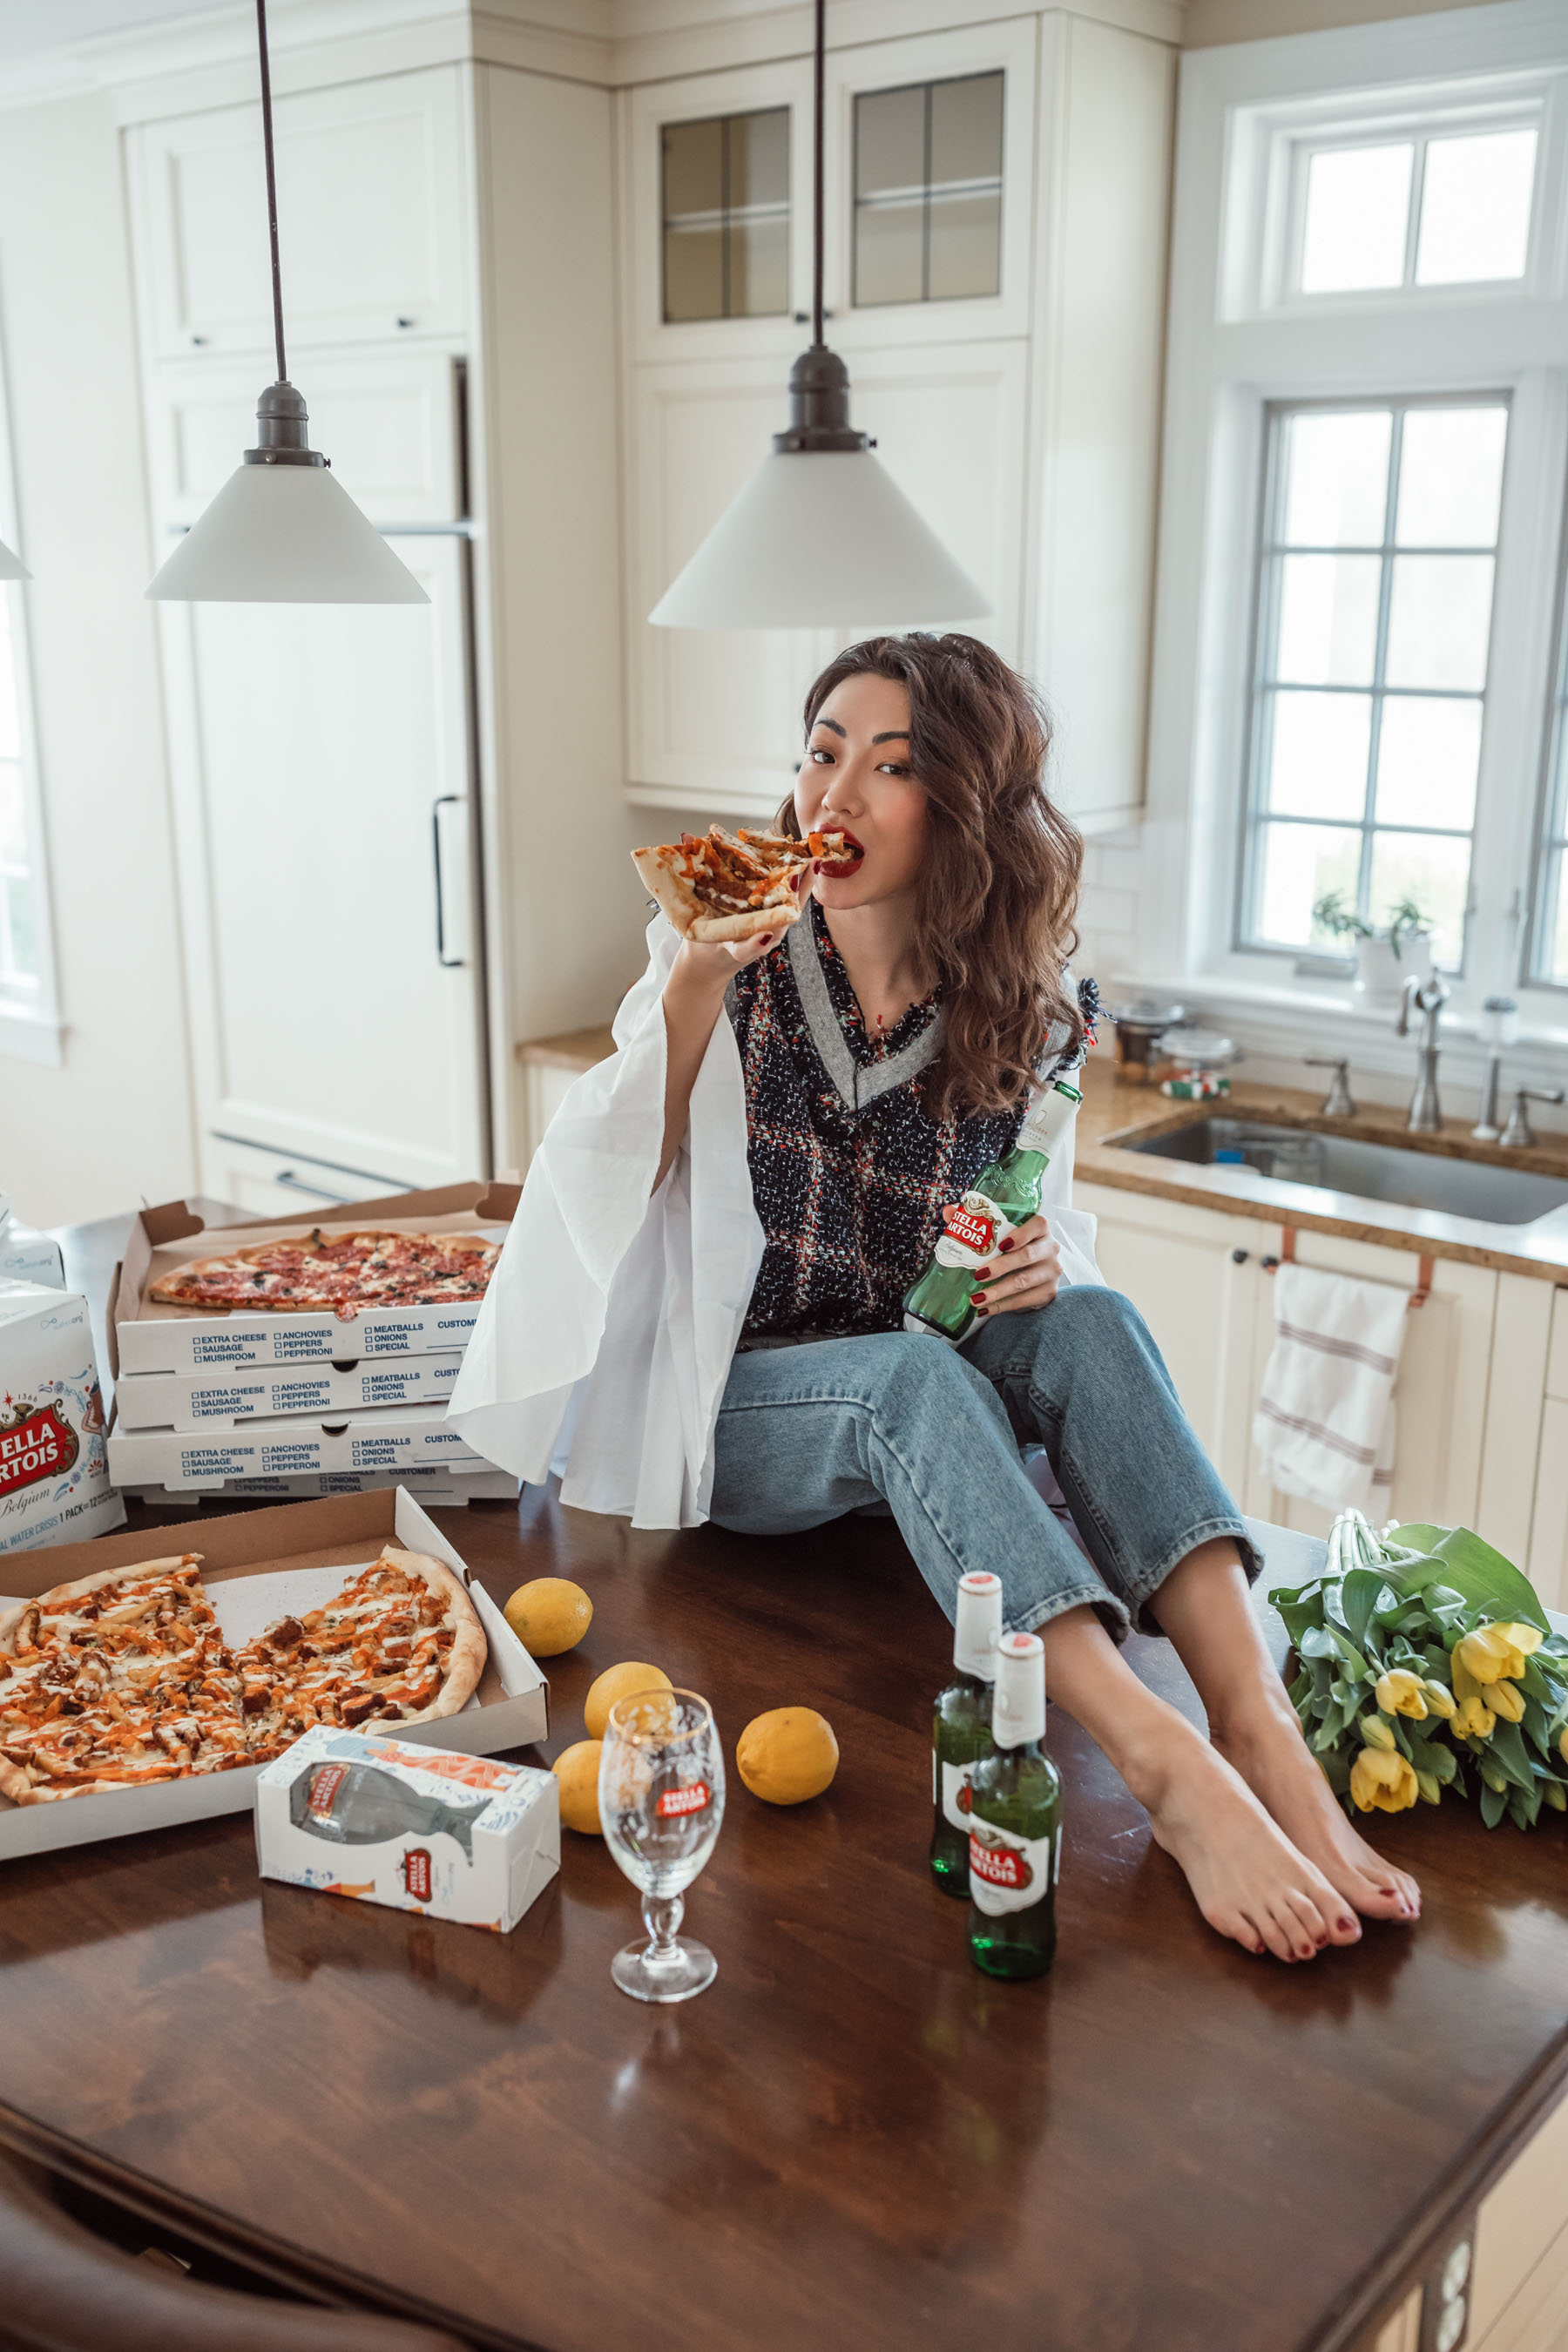 How to Throw a Super Bowl Party That Matters // Notjessfashion // Stella Artois, Super Bowl Party, fashion blogger, new york fashion blogger, jessica wang